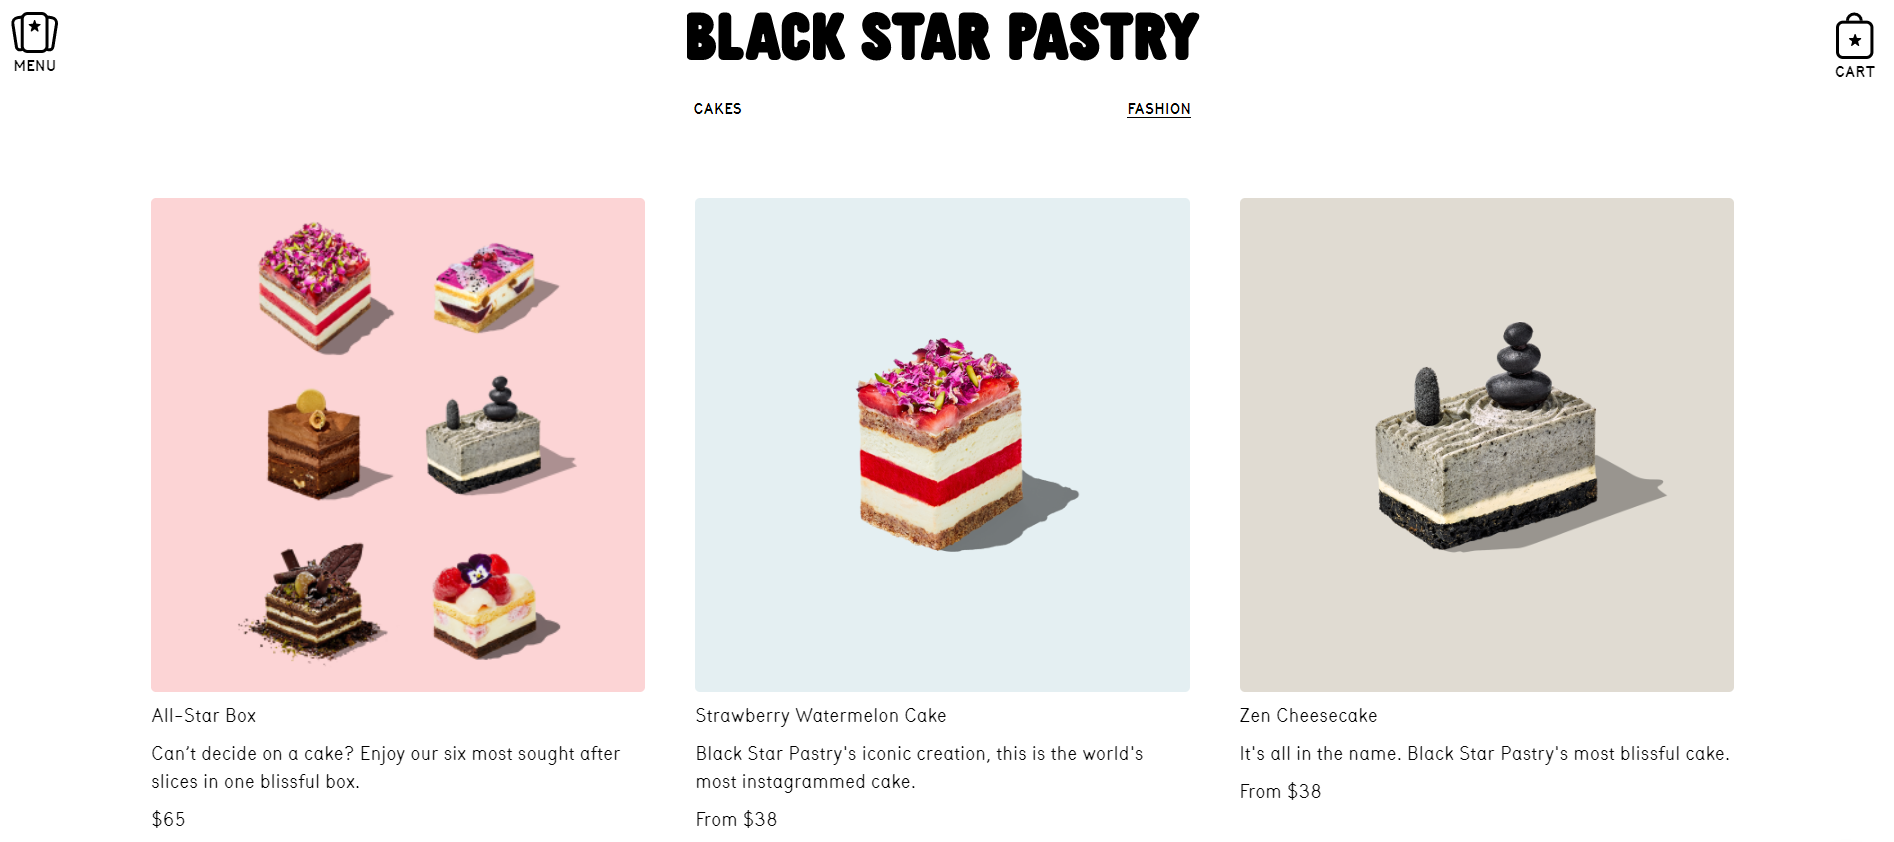 Pictures of aesthetic food are the main advantage of the Black Star Pastry website